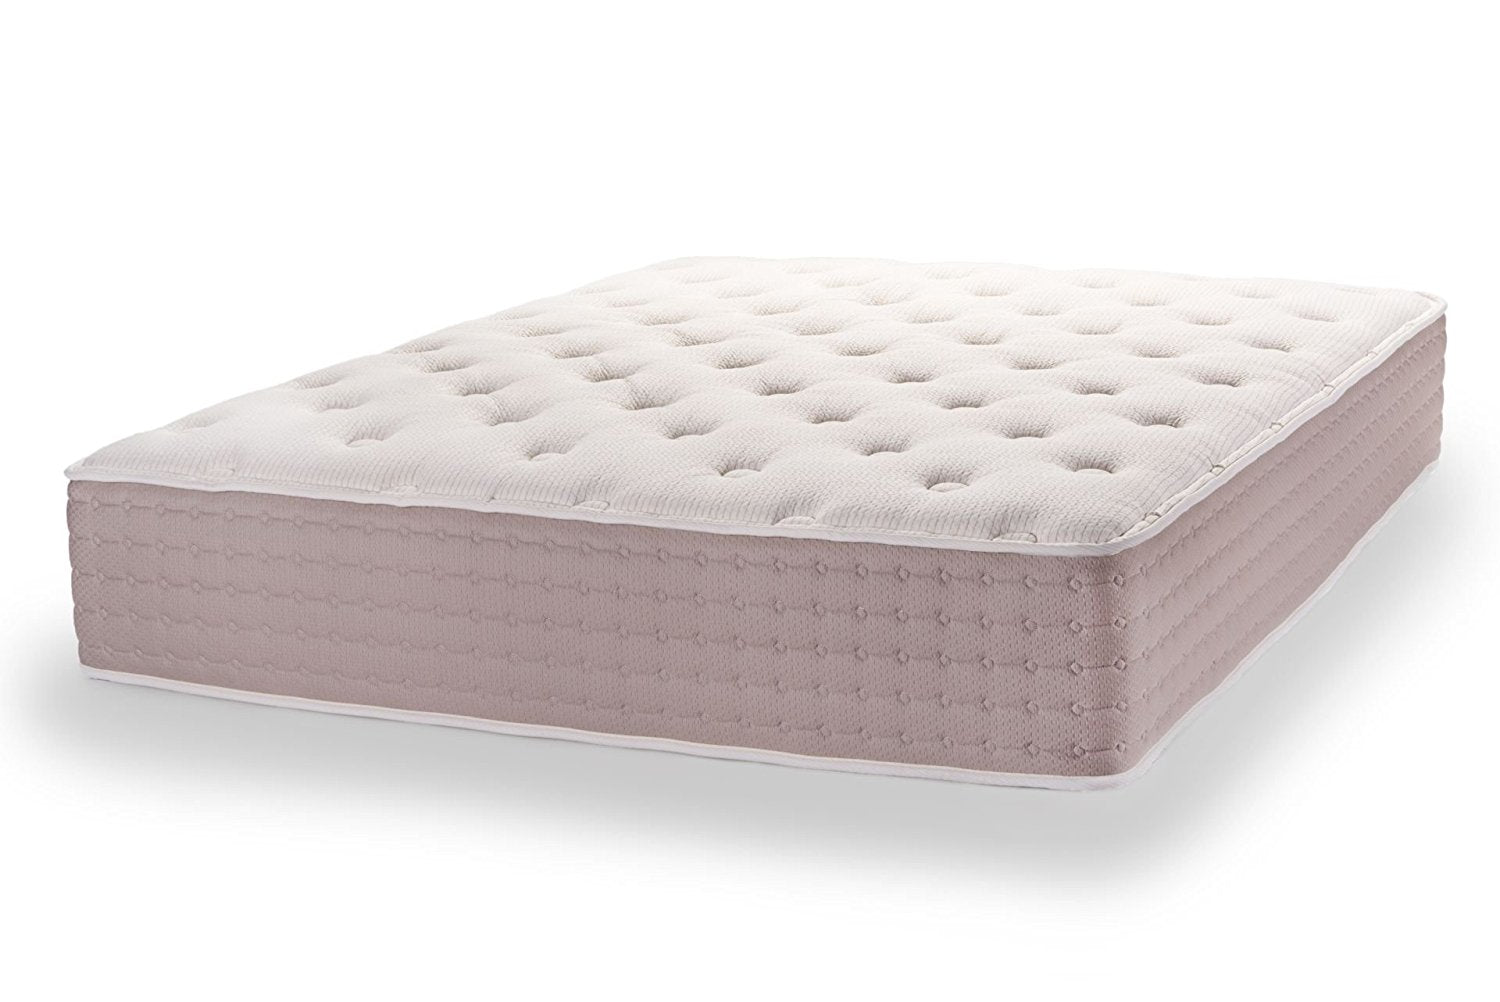 Does a Latex Mattress Get Softer Over Time? 